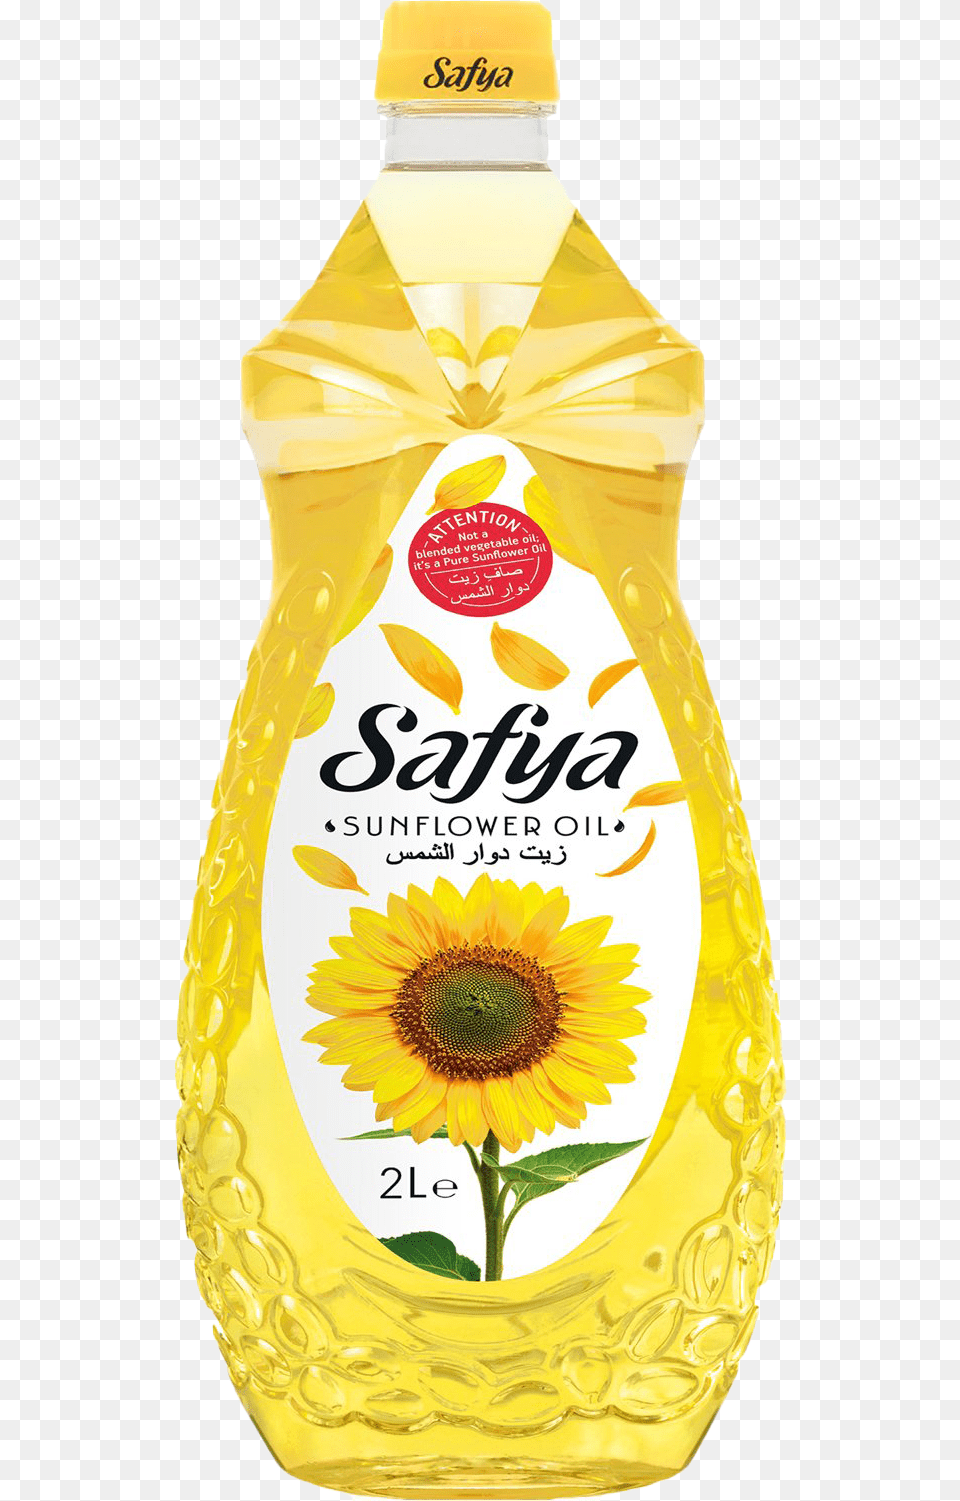 Sunflower Oil Transparent Background Sunflower Oil Turkey, Cooking Oil, Food, Bottle, Cosmetics Png